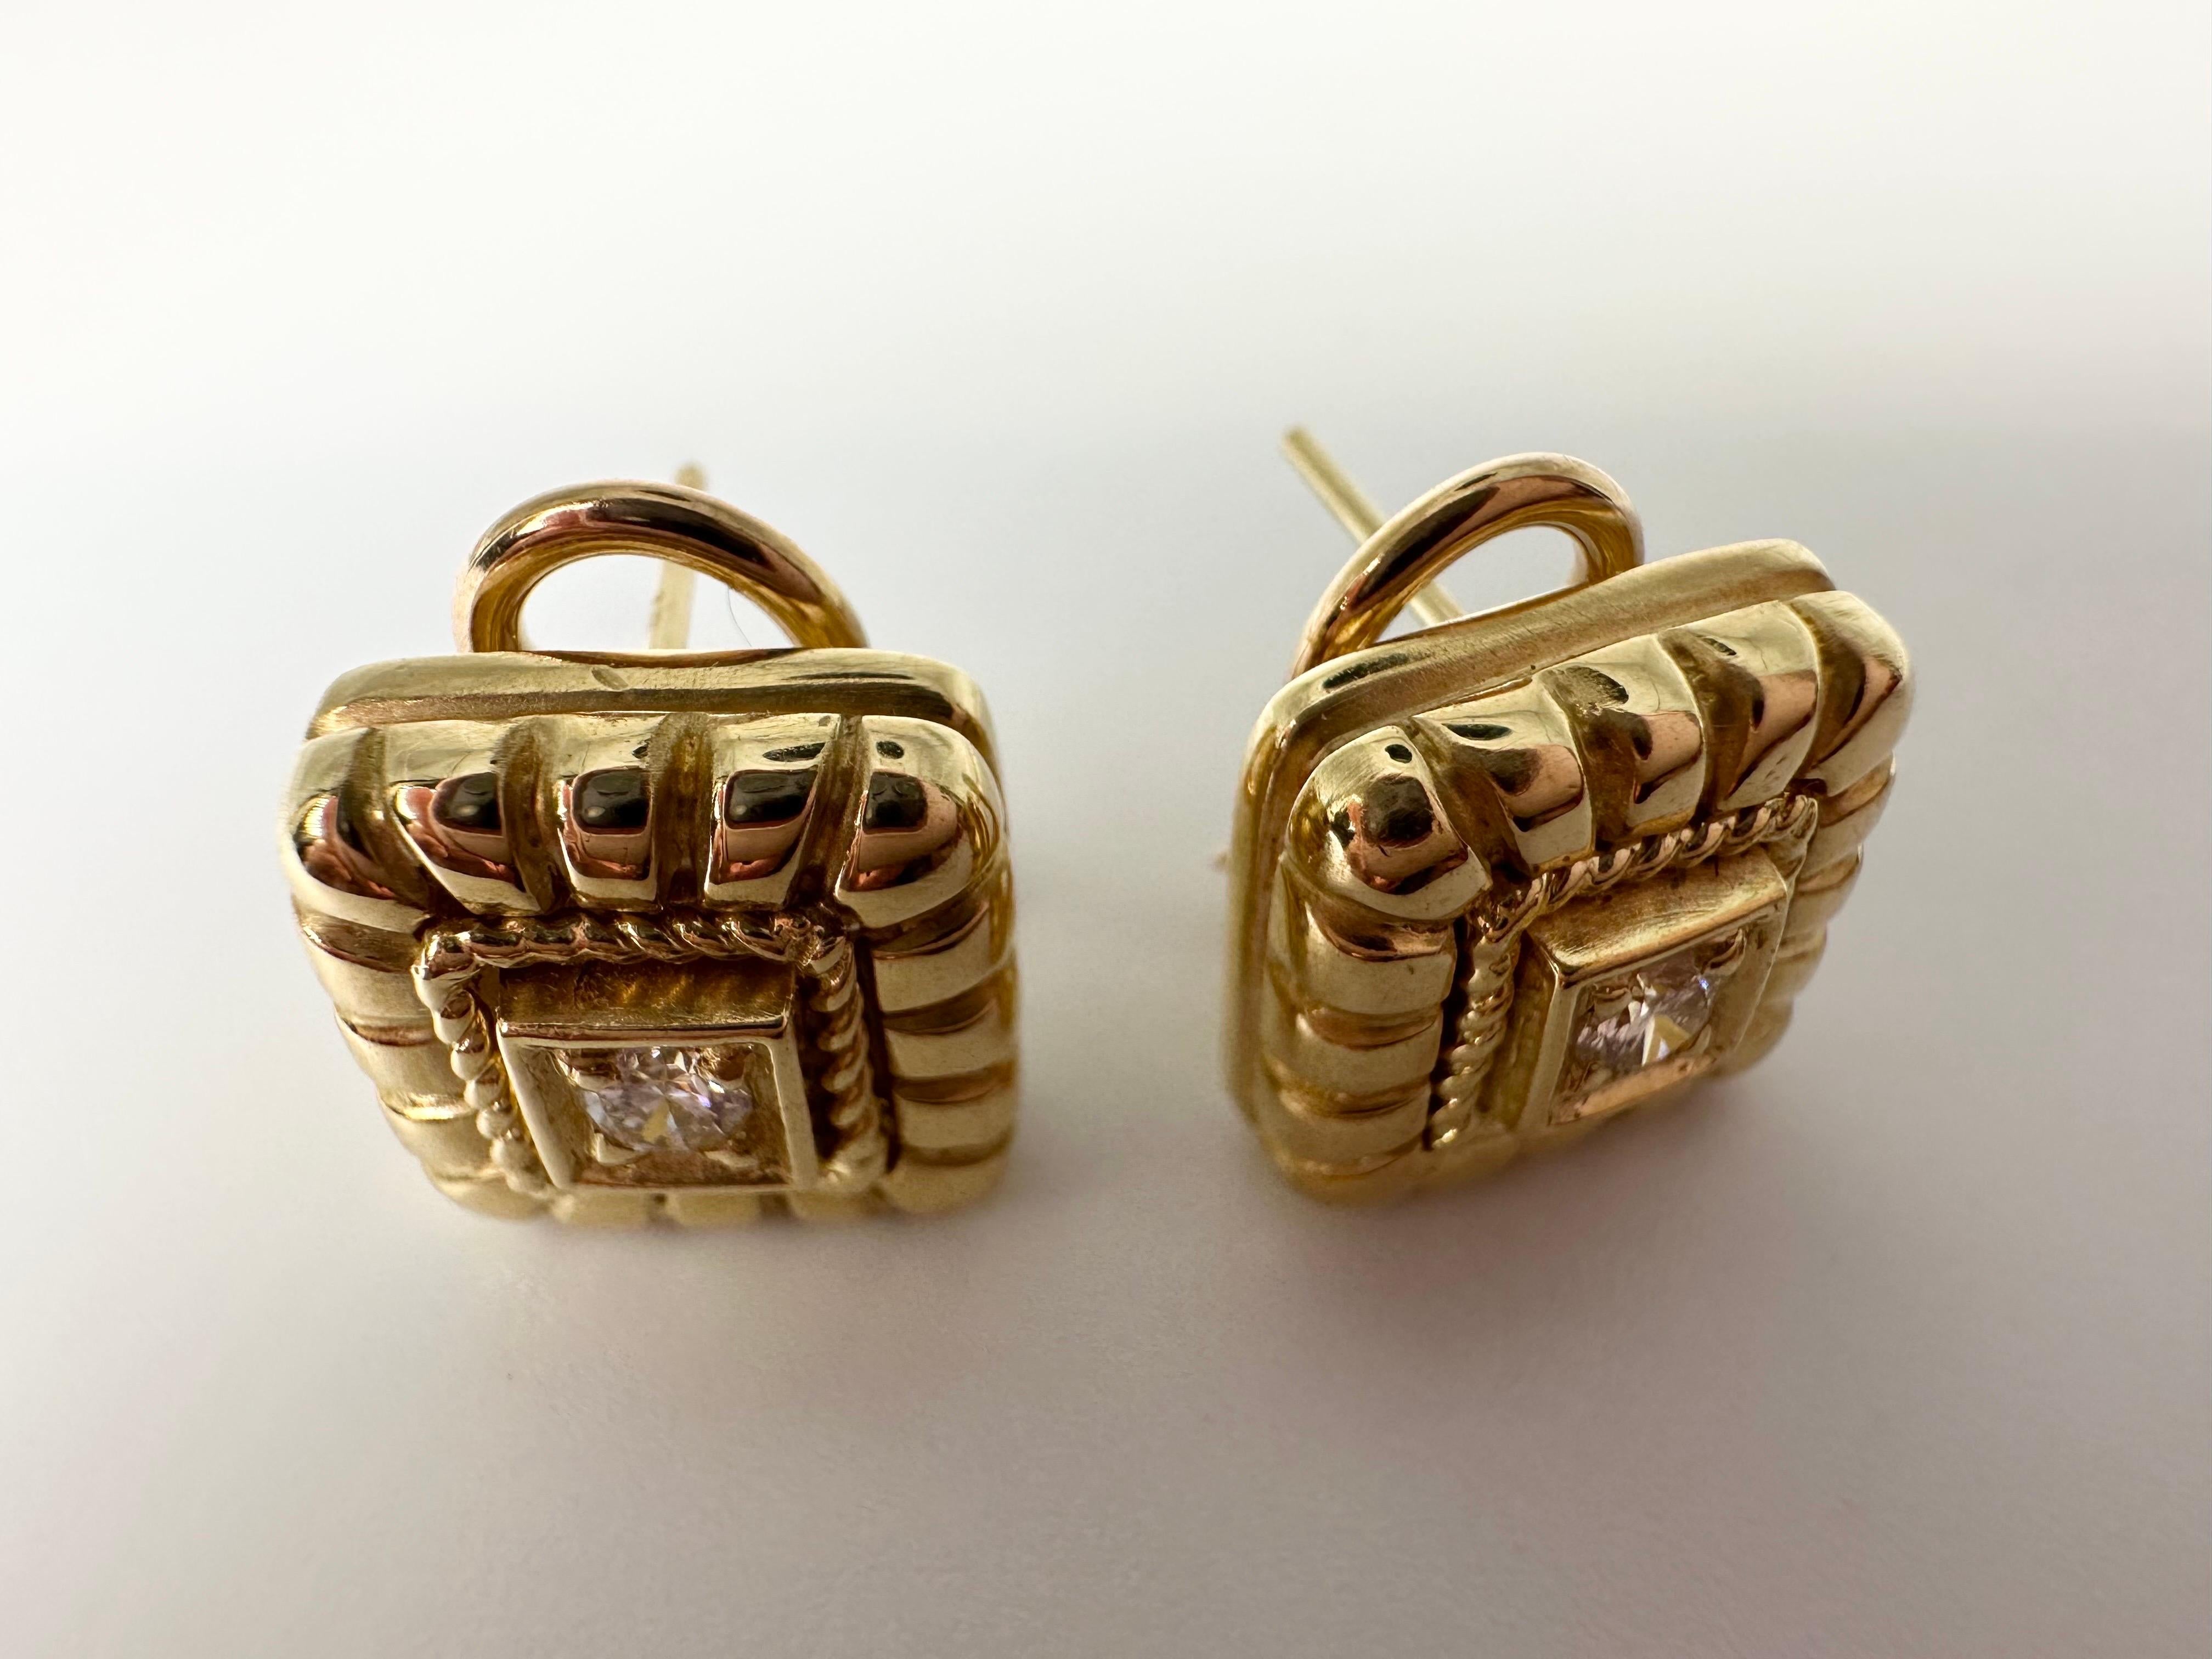 Diamond earrings by Penny Preville stunning omega diamond earrings 18KT In Excellent Condition For Sale In Jupiter, FL